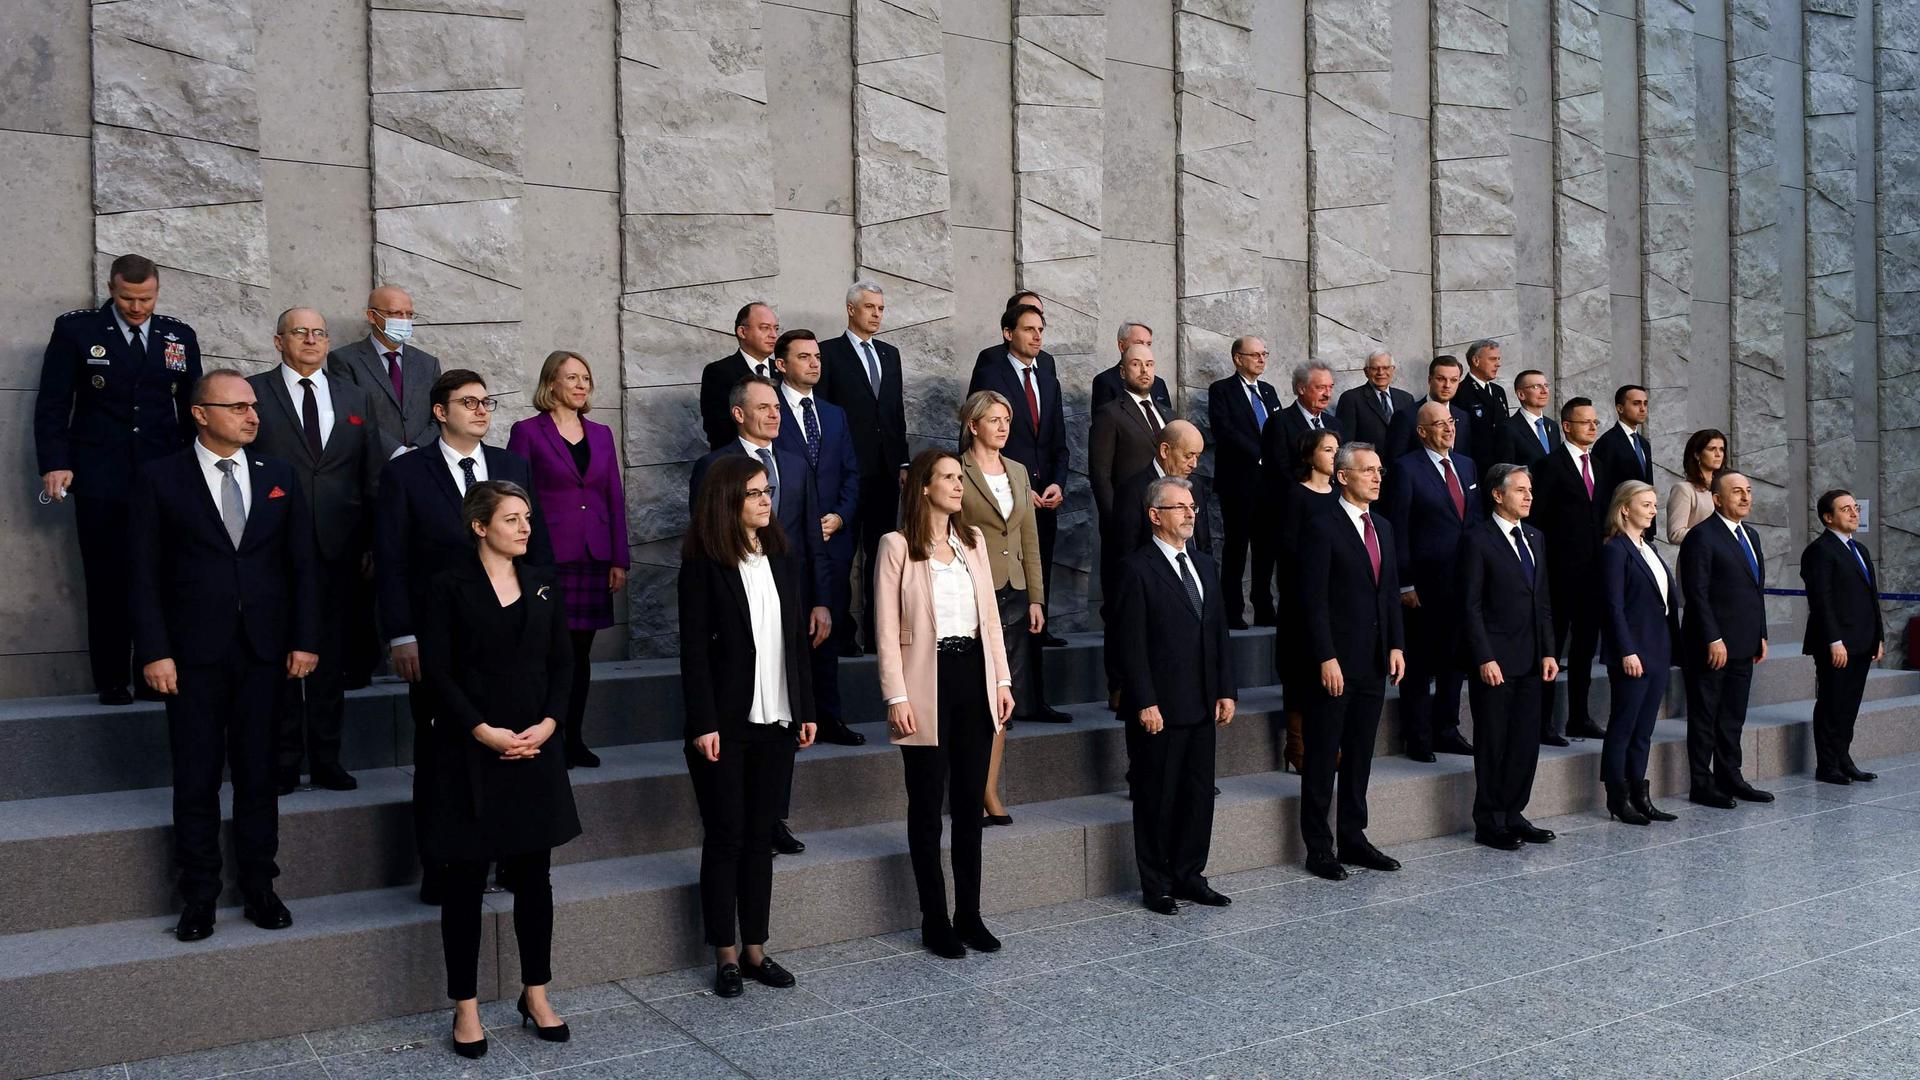 NATO Secretary General Jens Stoltenberg (front row 5th L) stands next to US Secretary of State Antony Blinken (front row- 6th L) and members of the North Atlantic Council (NAC) and Foreign Ministers as they pose for a family photo at the NATO Headquarters in Brussels on March 4, 2022. - 